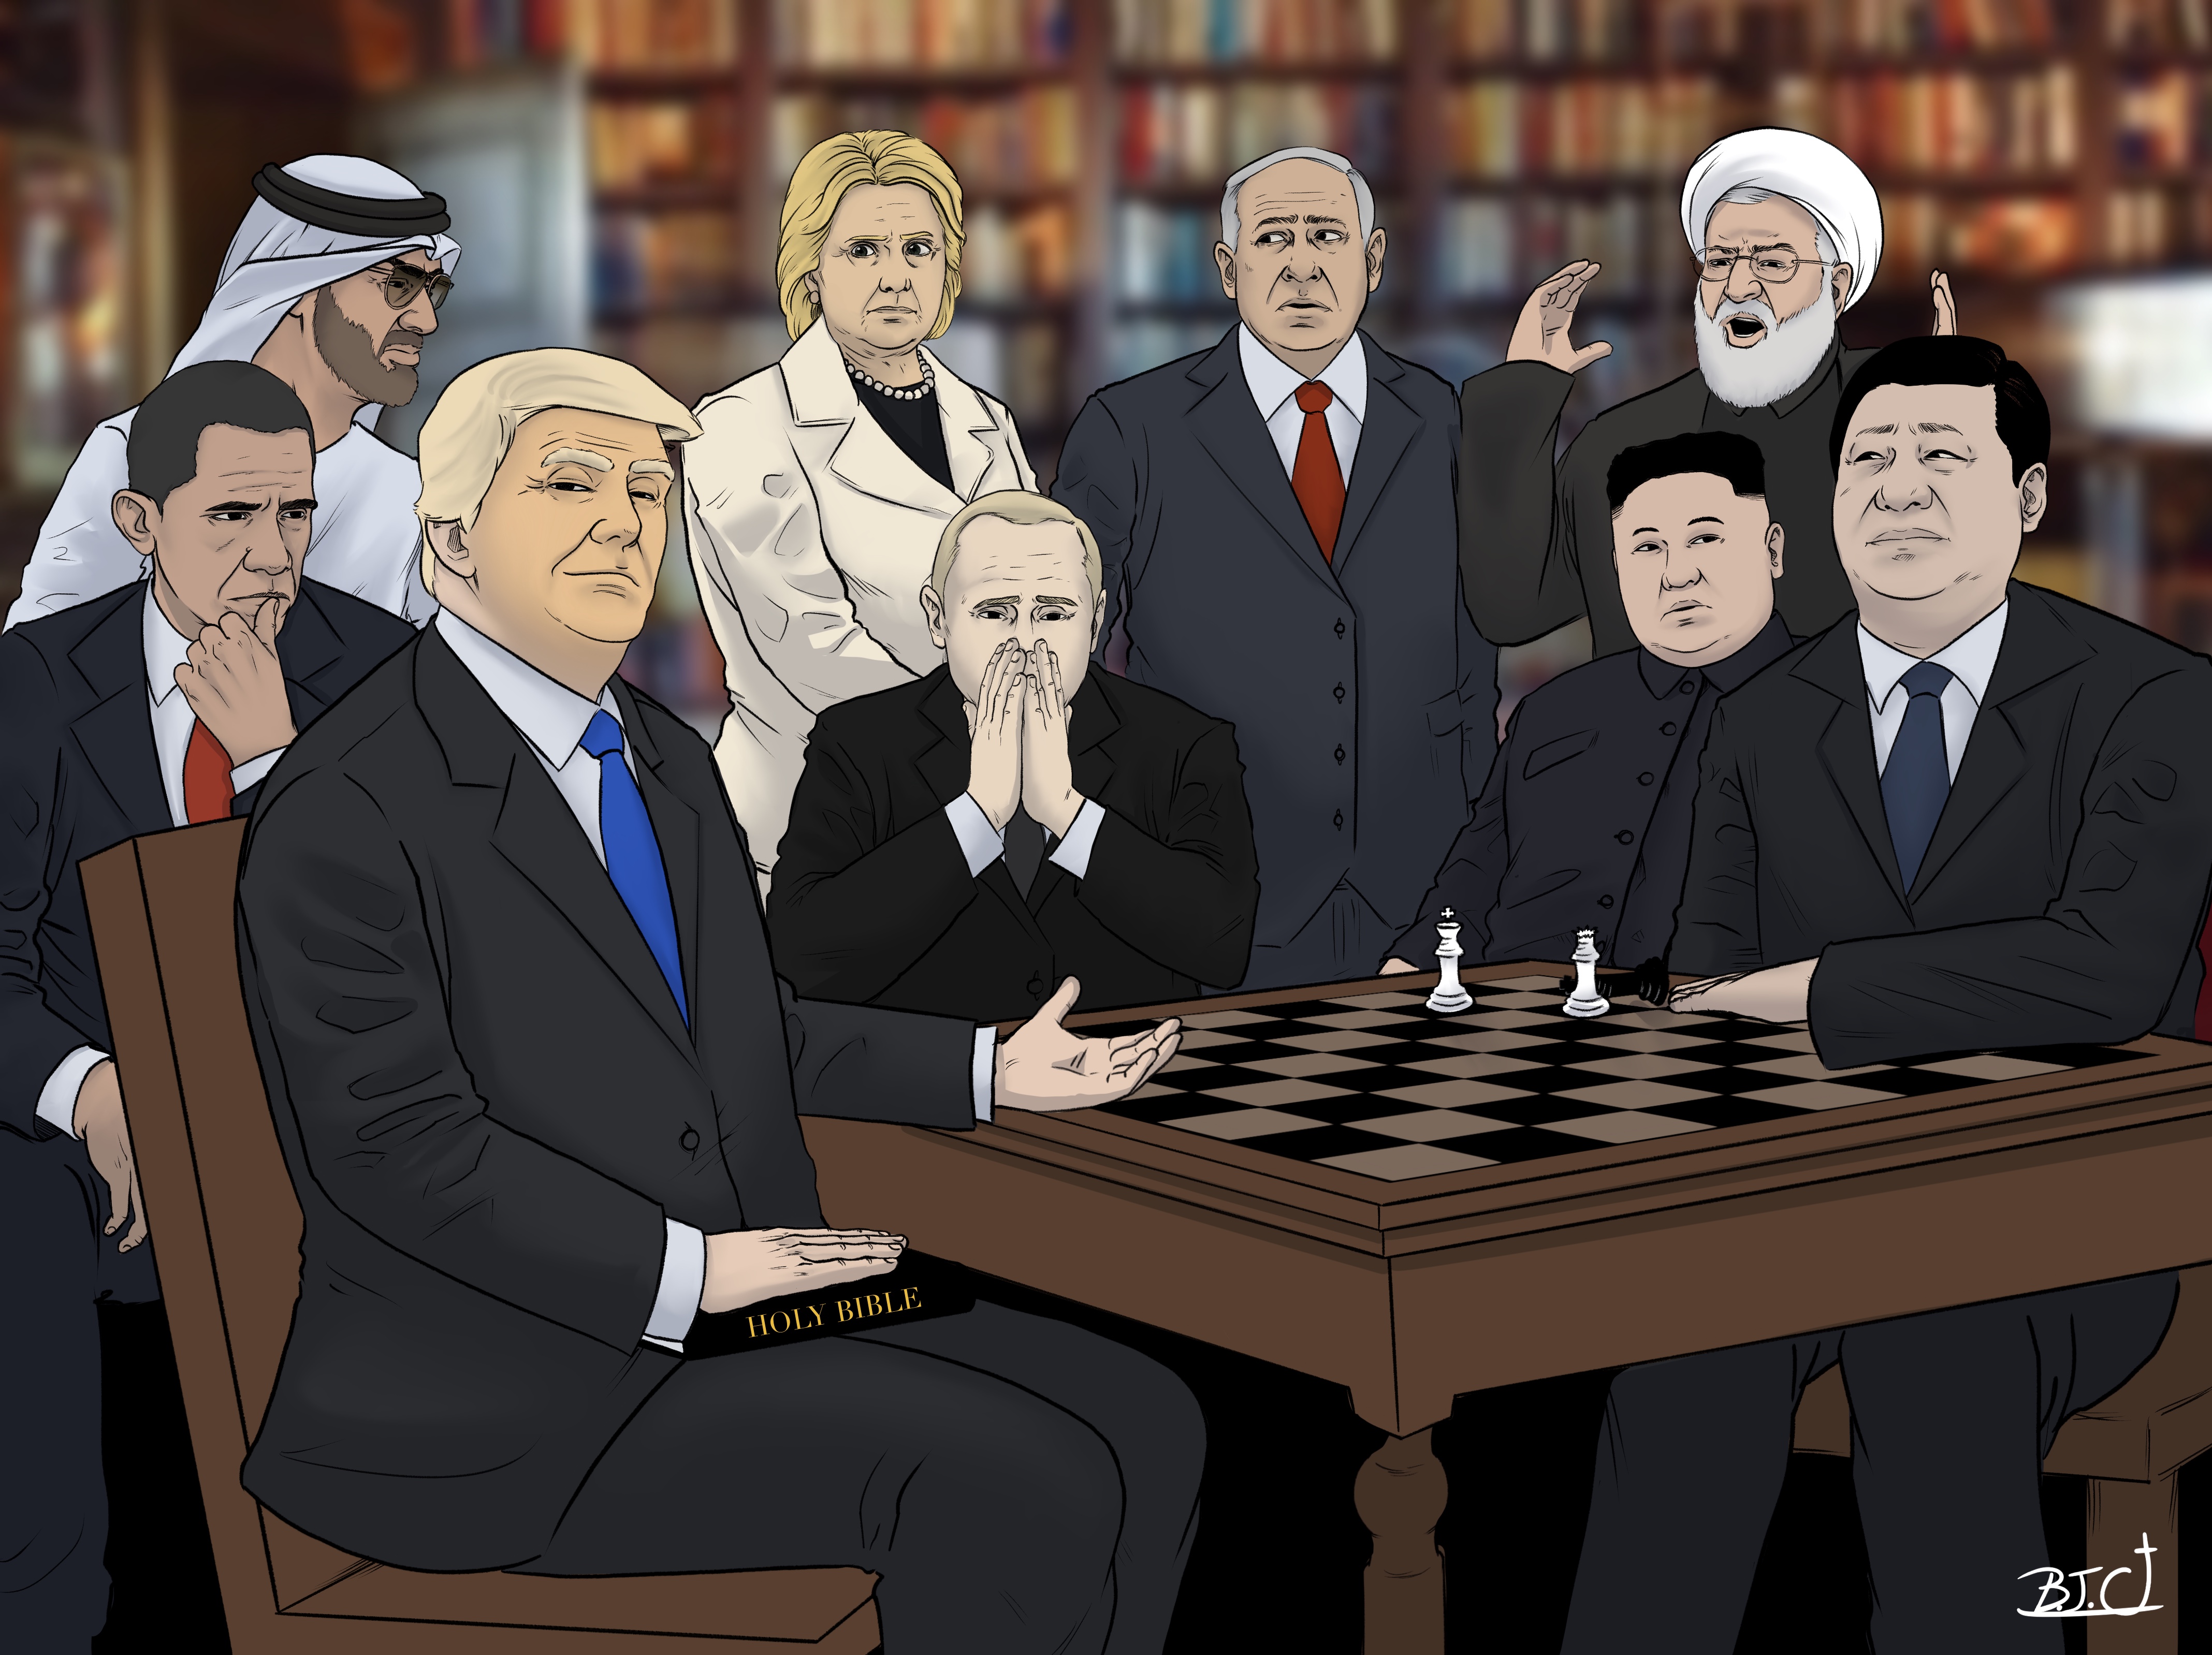 Checkmate Trump vs. The World in 5D Chess 